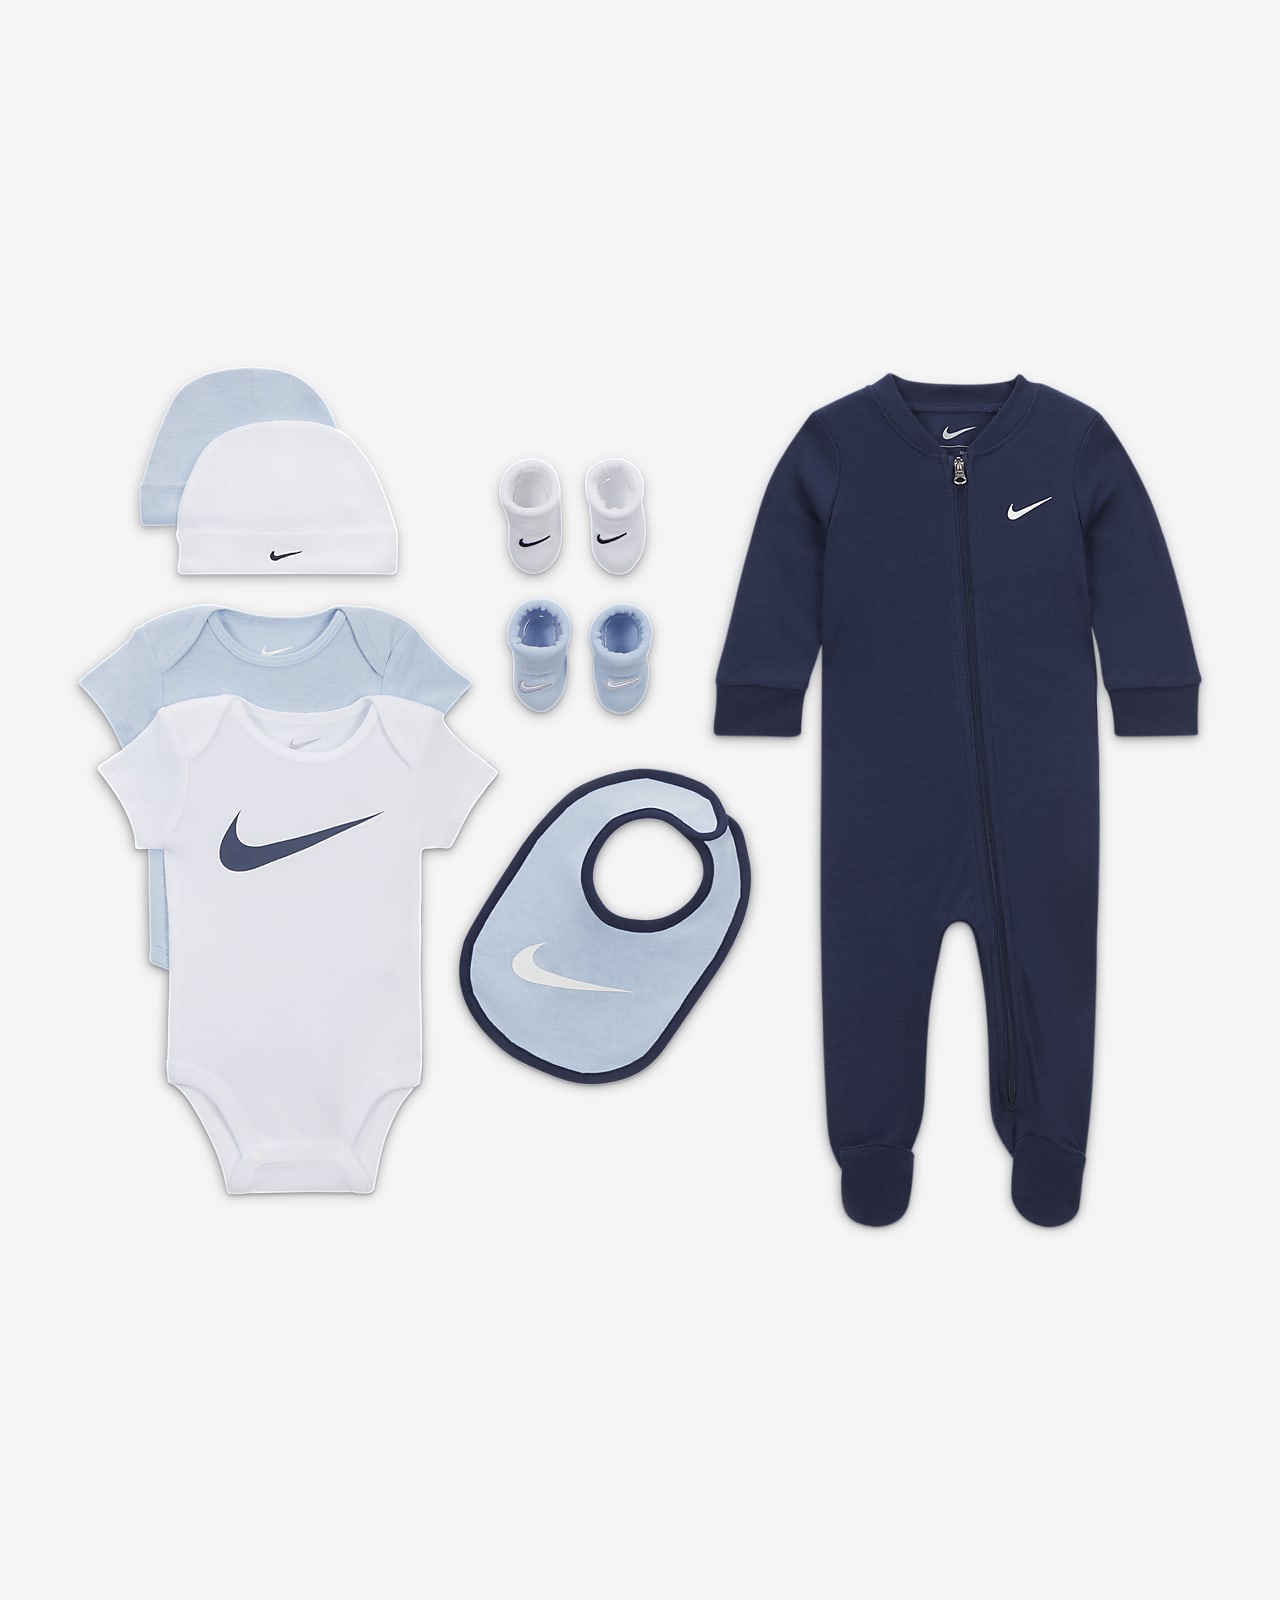 Nike Baby (0-6M) 8-Piece Boxed Gift Set